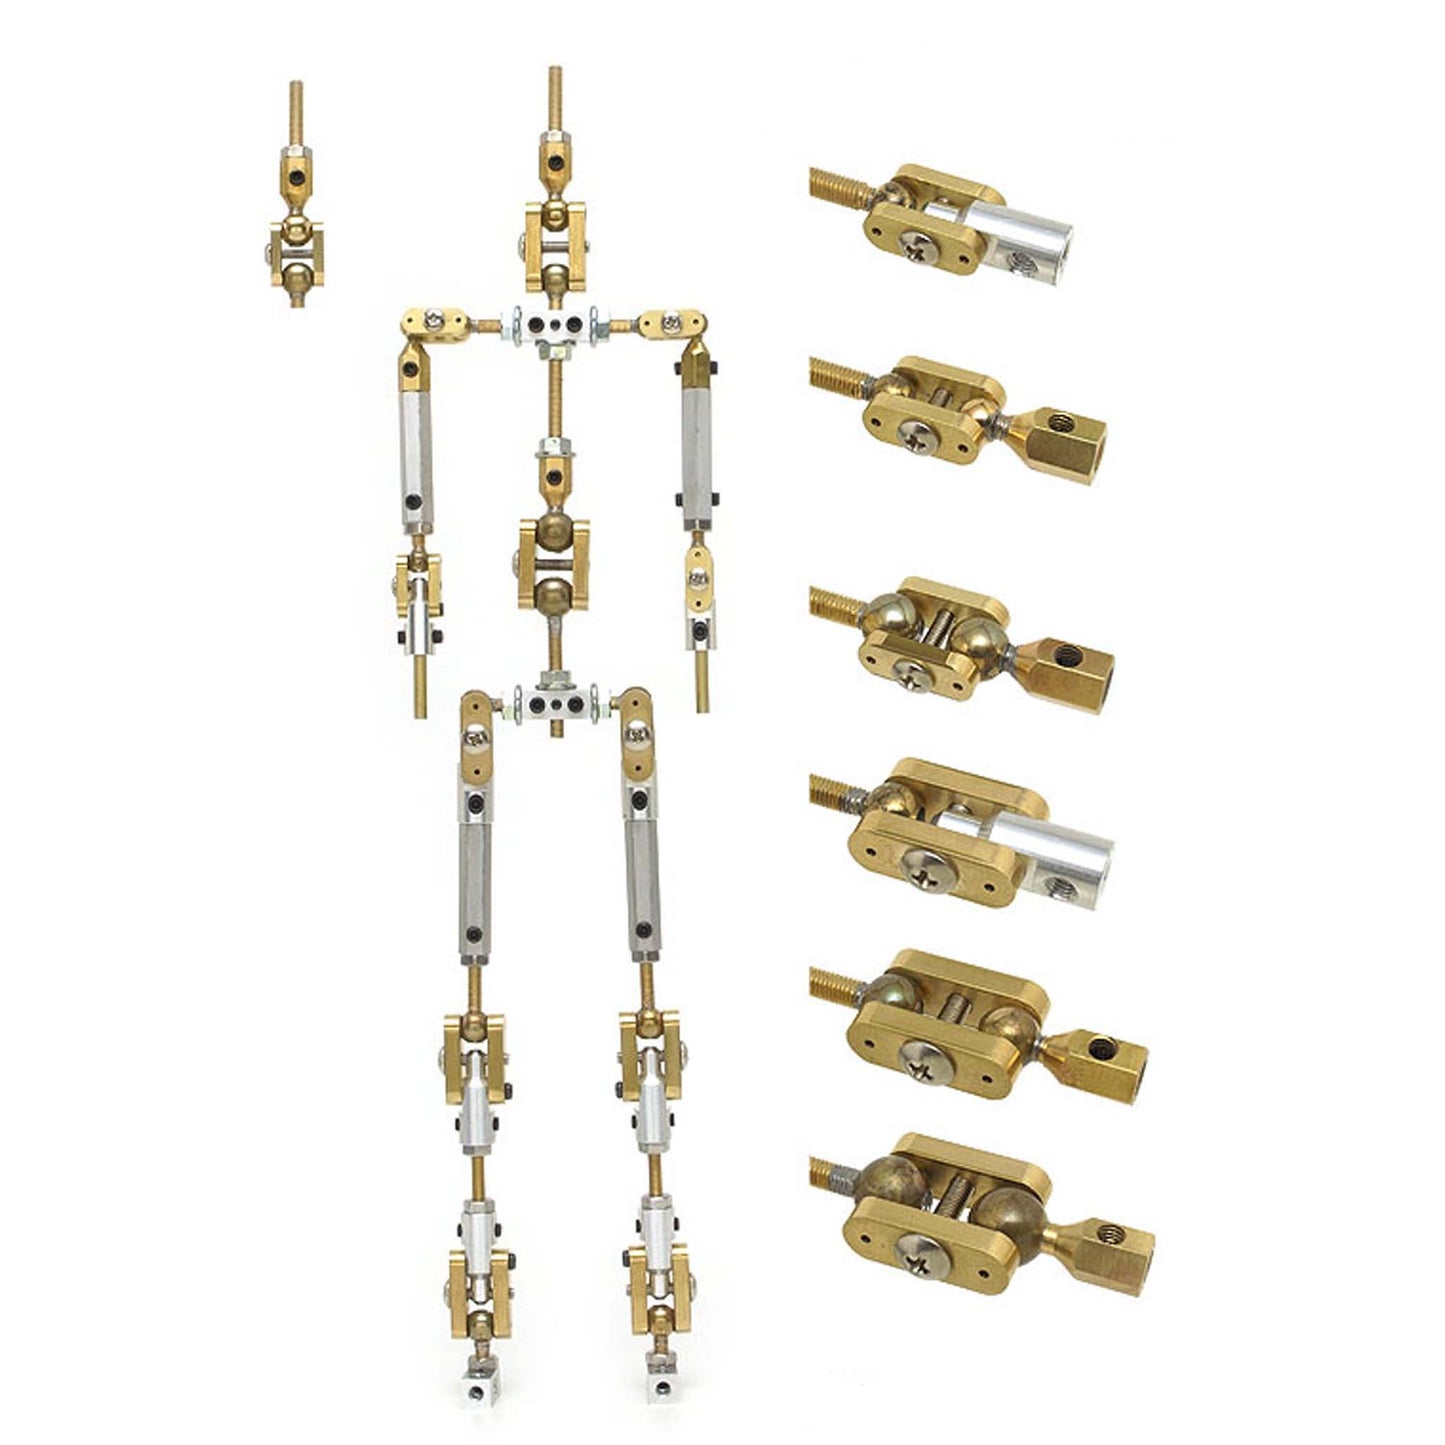 A fully assembled ArmaBenders 2 Armature Kit with the various joints shown on the right.